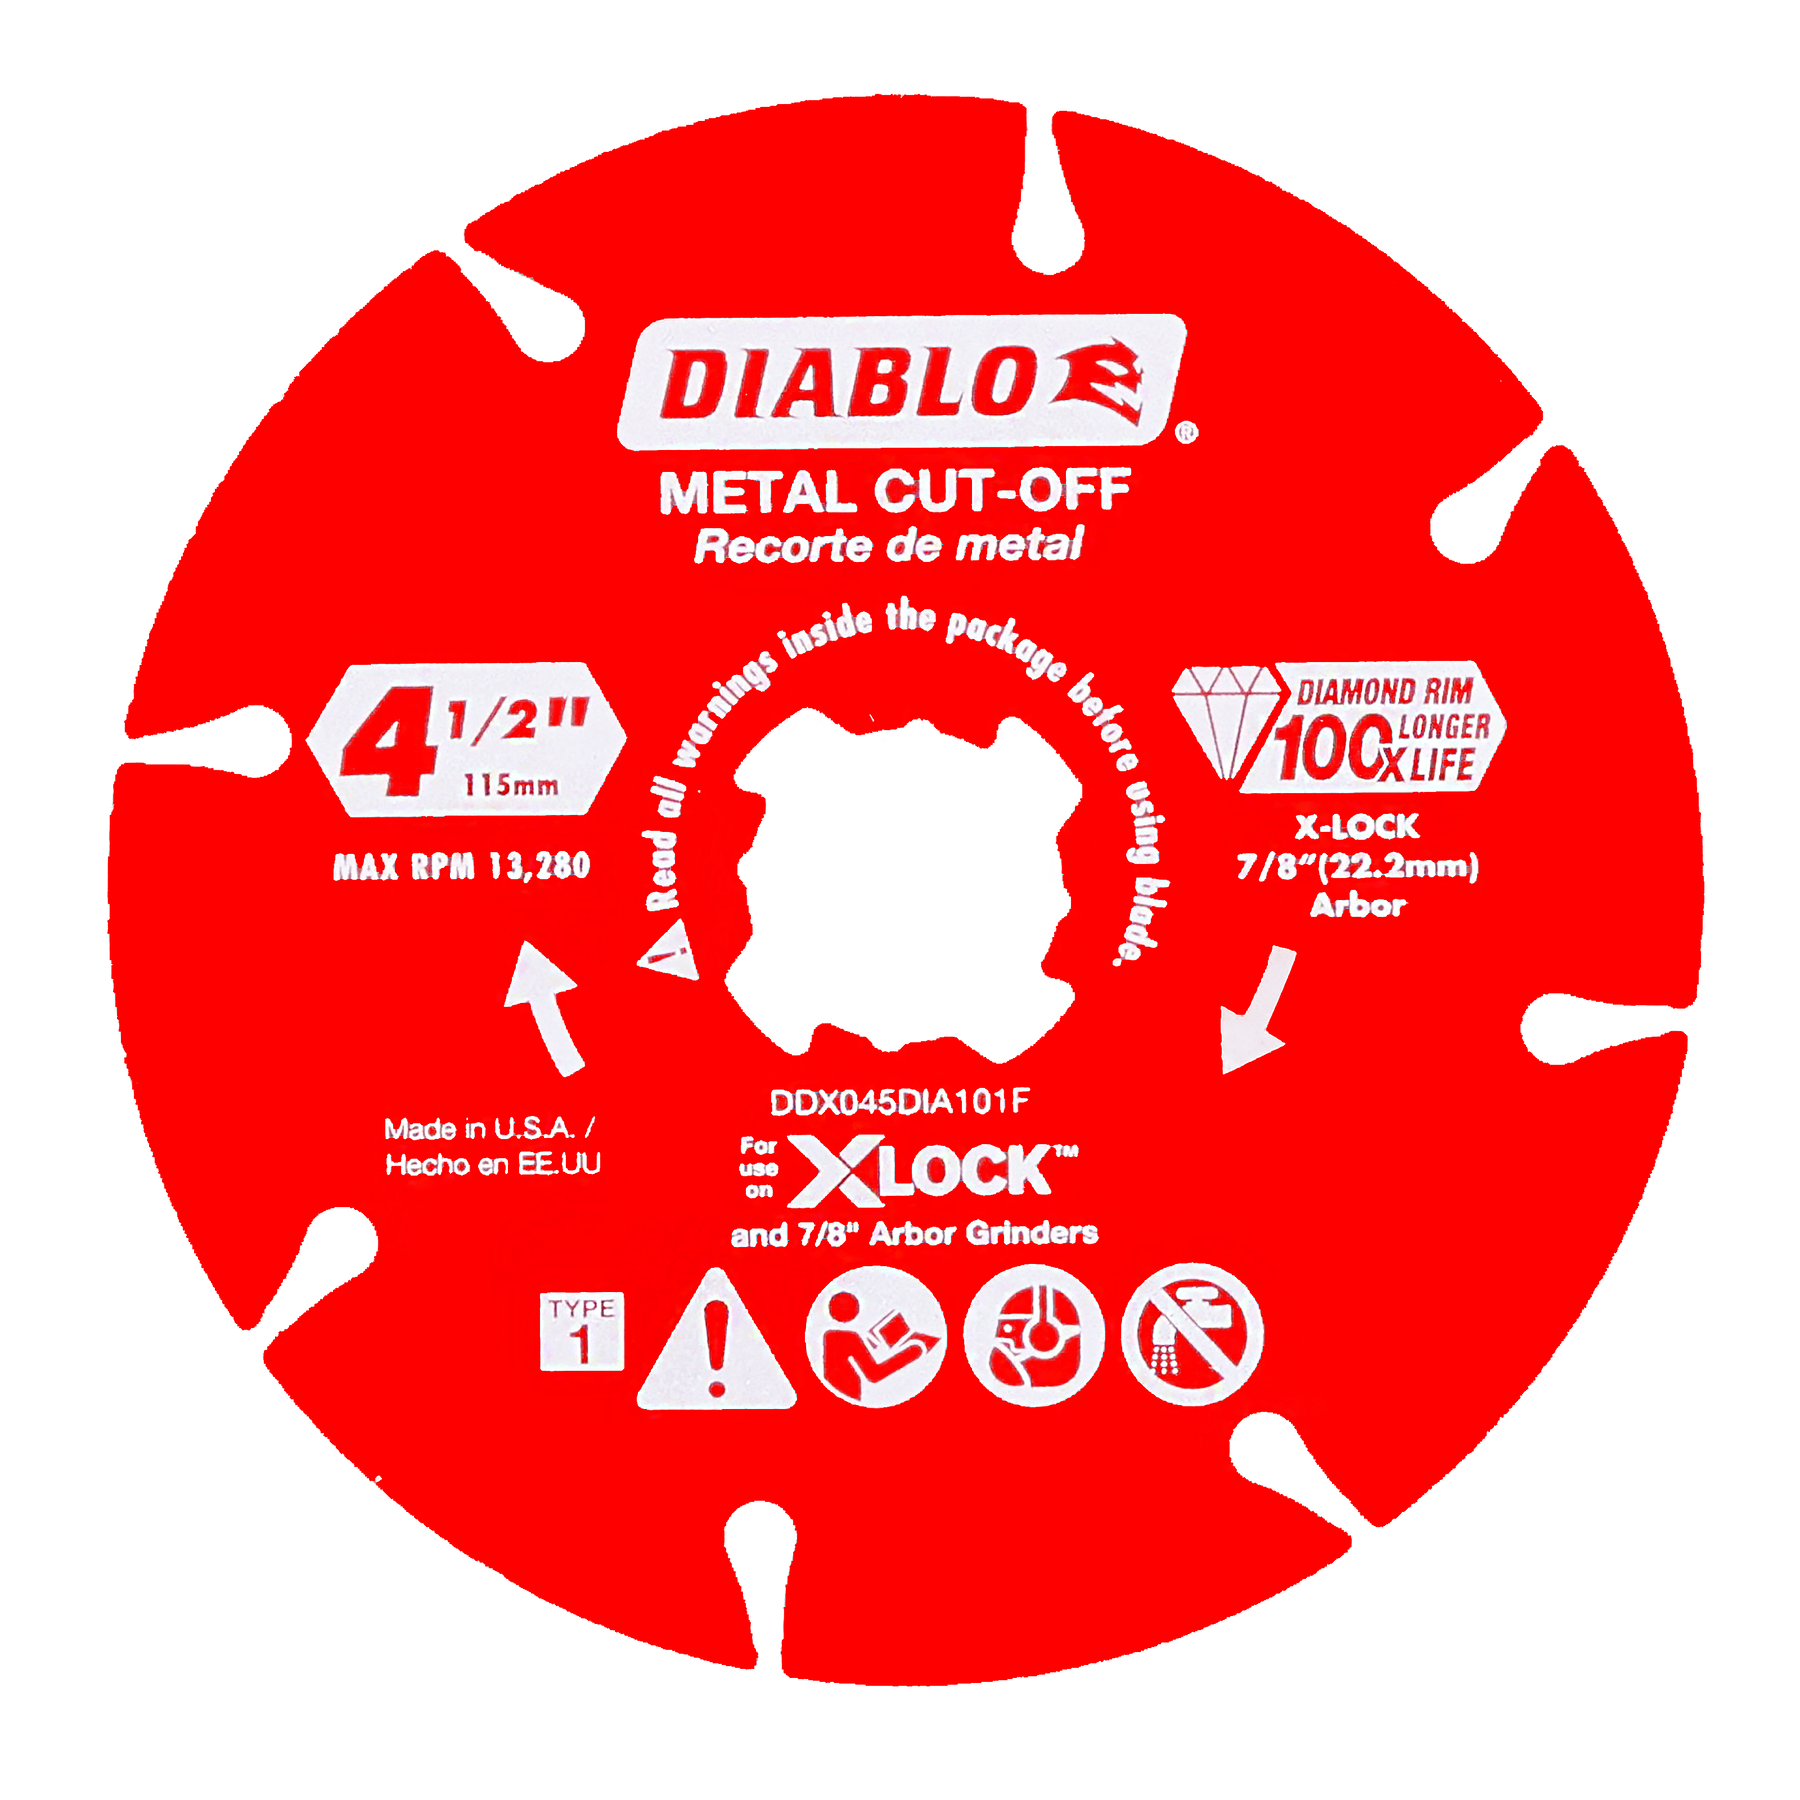 Diablo Diamond Rimmed Disc for Metal Cutting with X-Lock and All Grinders